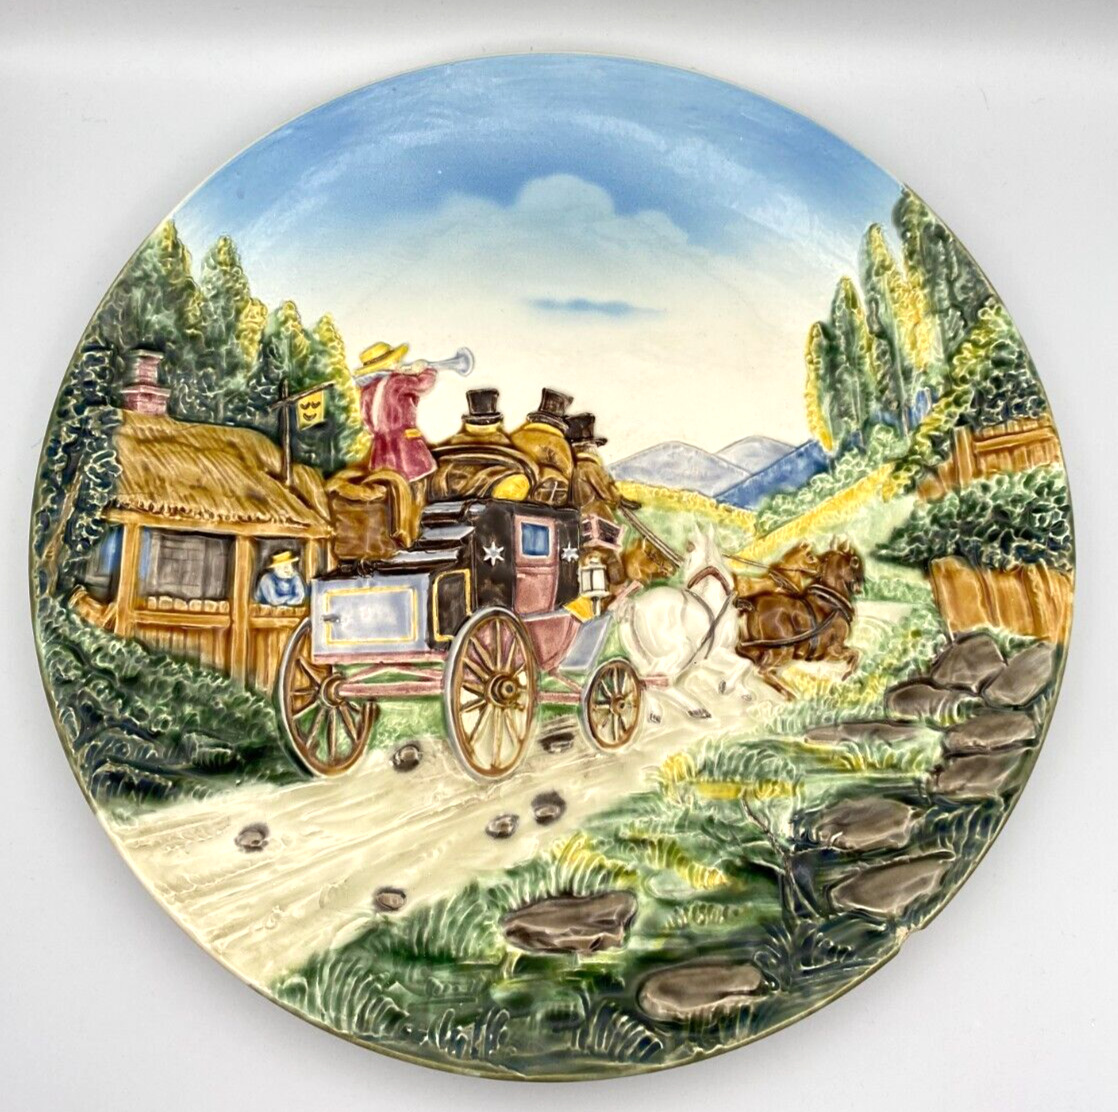 Vintage S & R Bas Relief Stagecoach Countryside Collector Plate 3806 W Germany